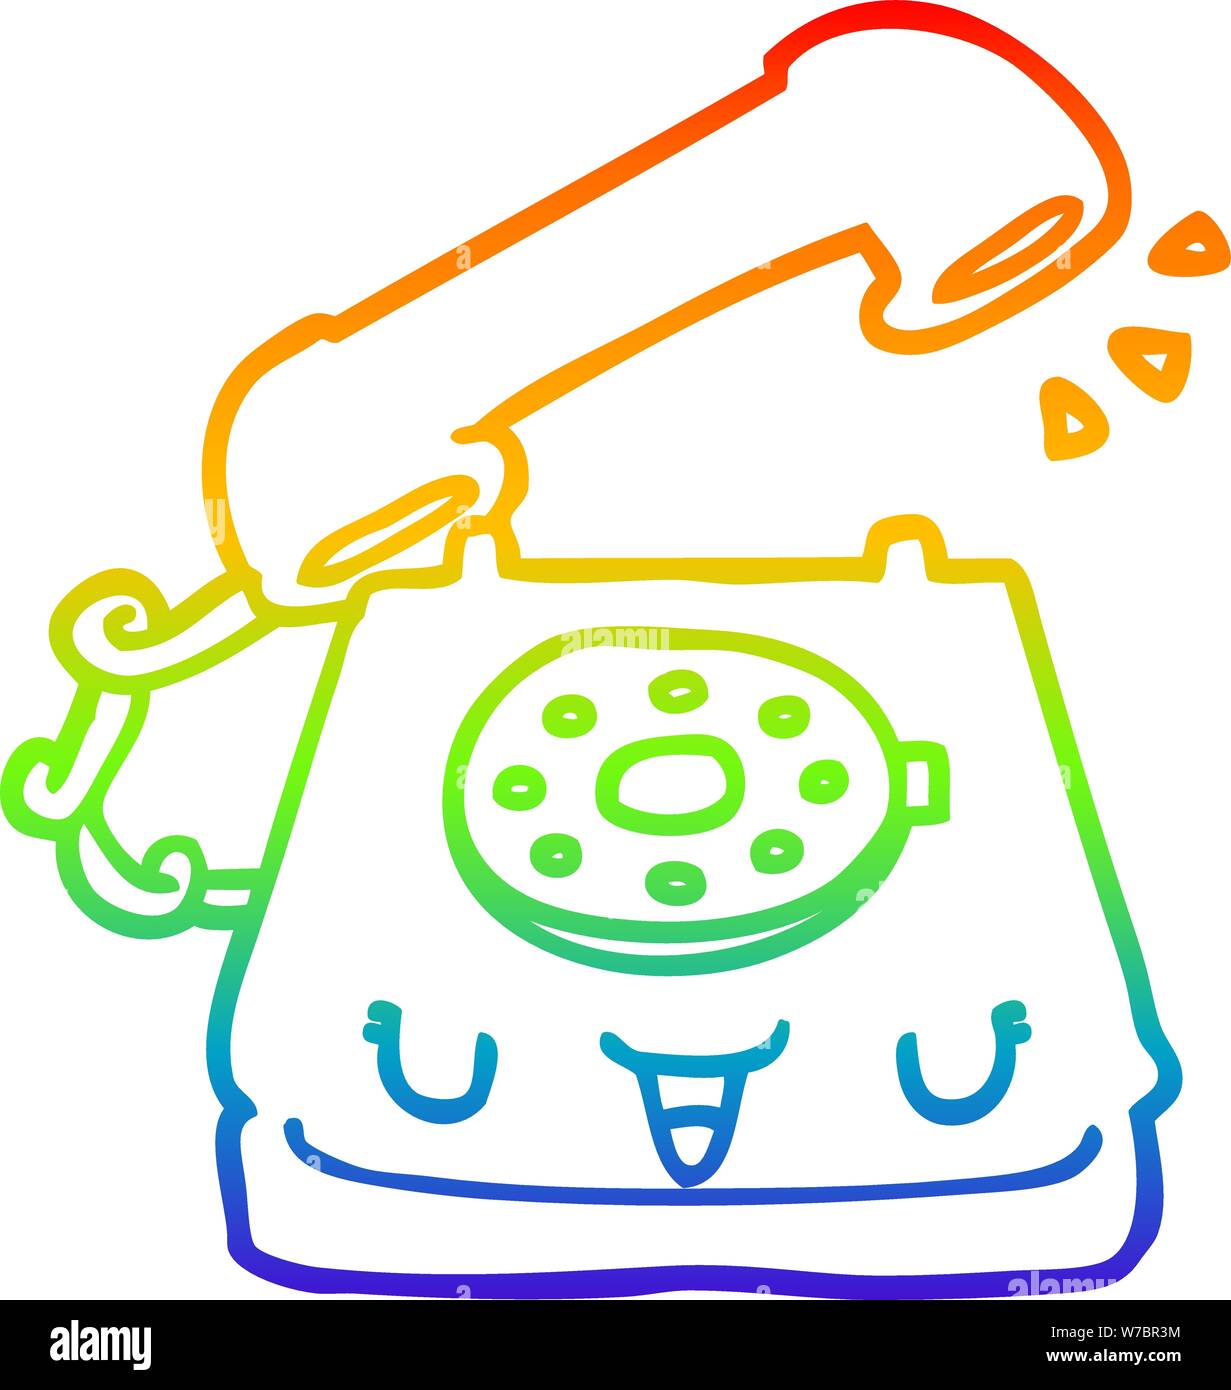 Old Telephone Drawn By Me 🙂☎️ : r/drawing